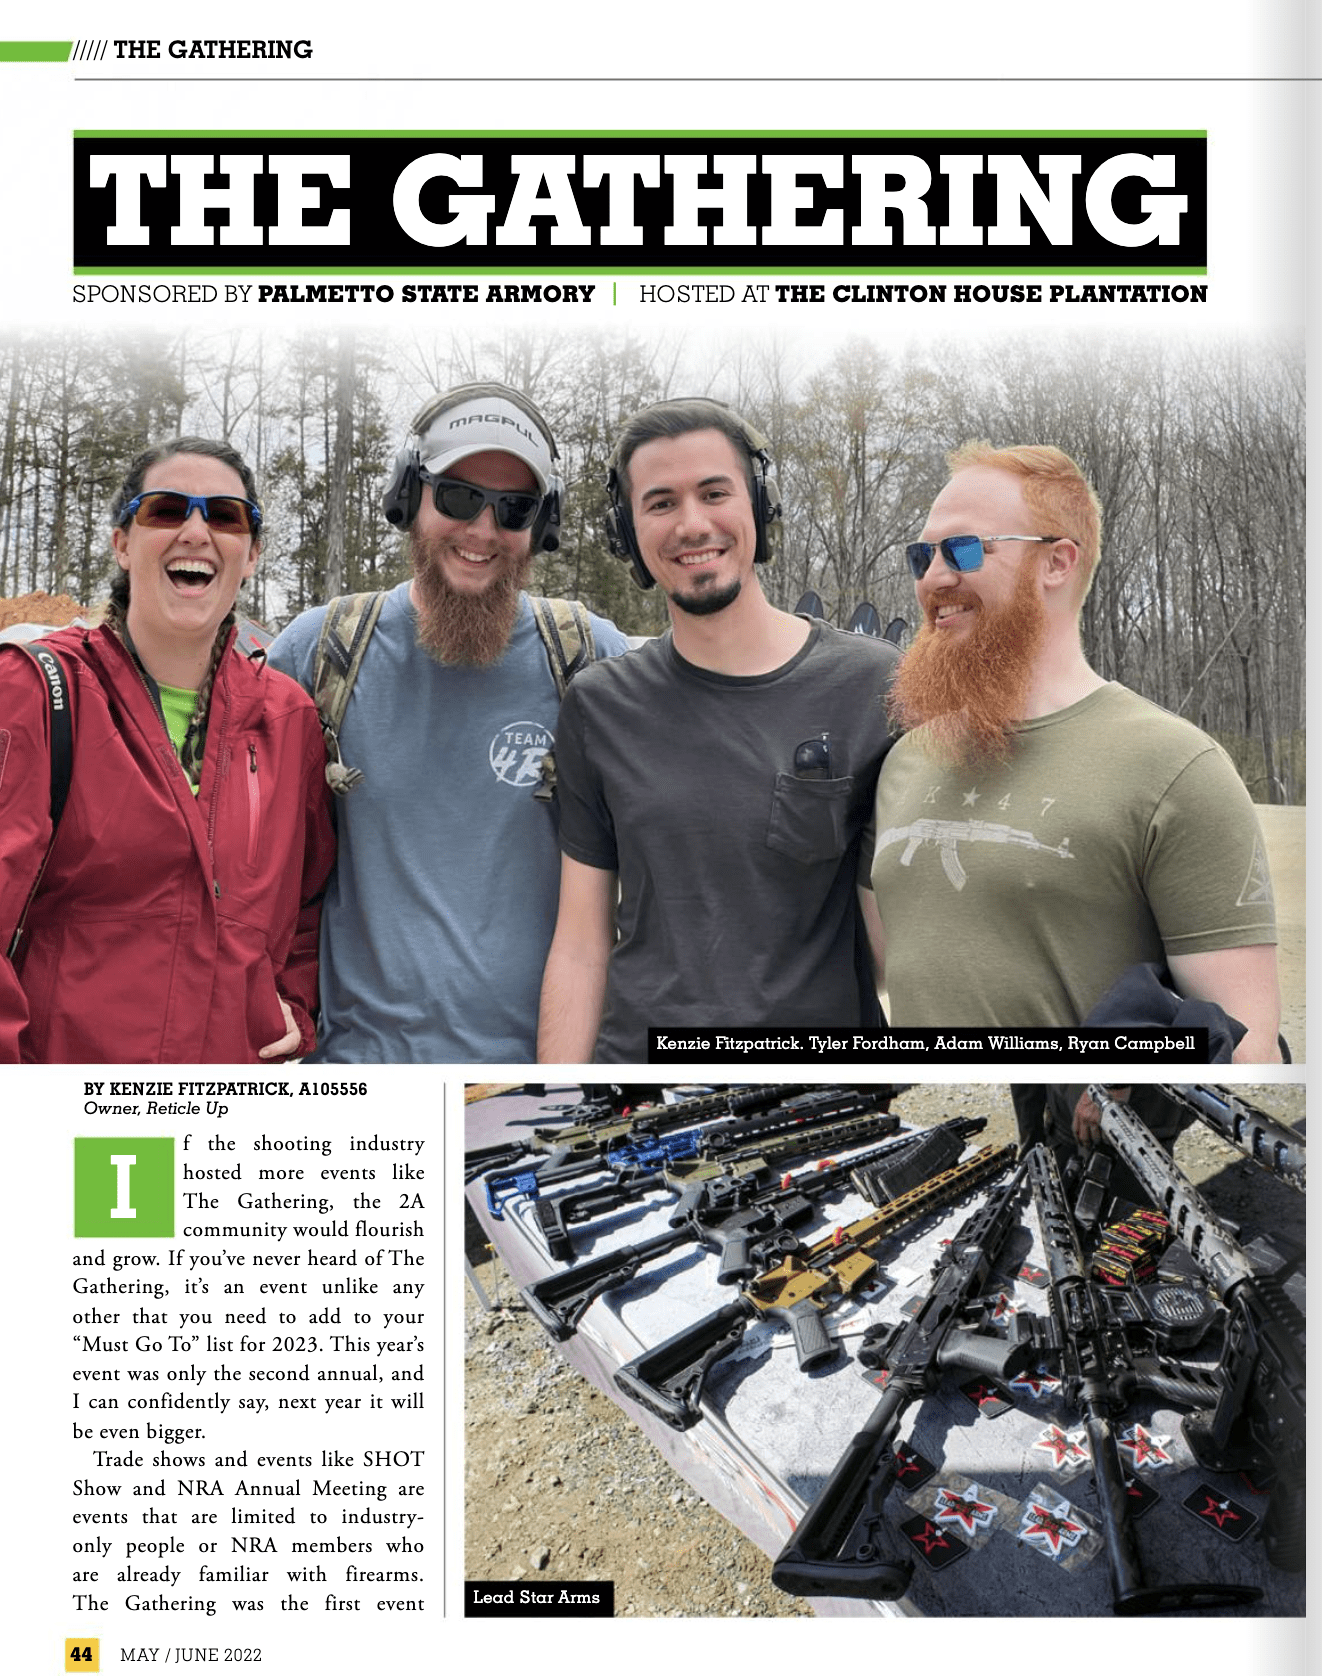 The Gathering Sponsored by Palmetto State Armory, Hosted by Clinton House Plantation